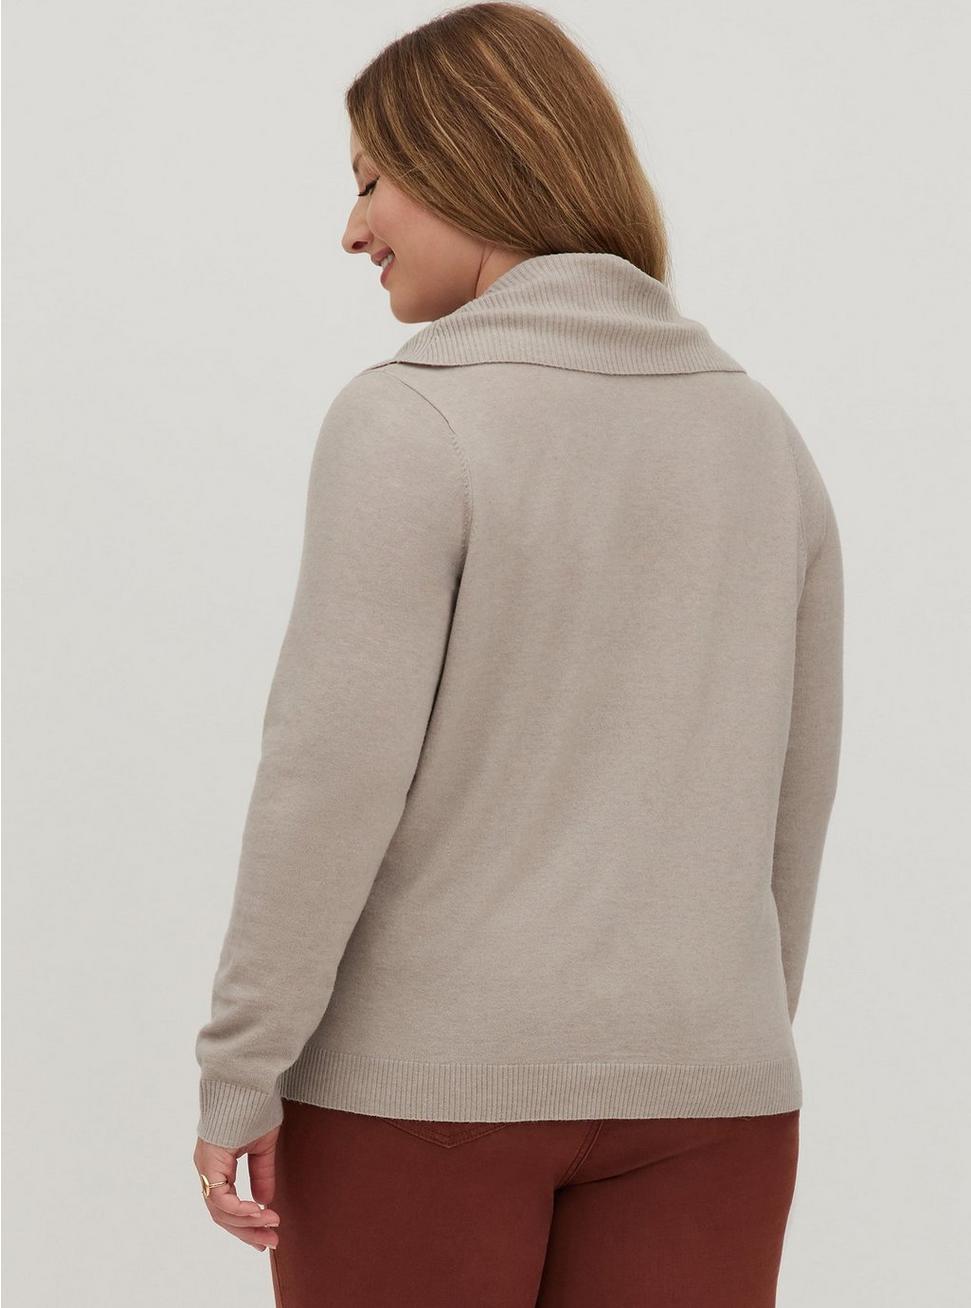 Plus Size Everyday Plush Pullover Cowl Neck Sweater, TAUPE, alternate